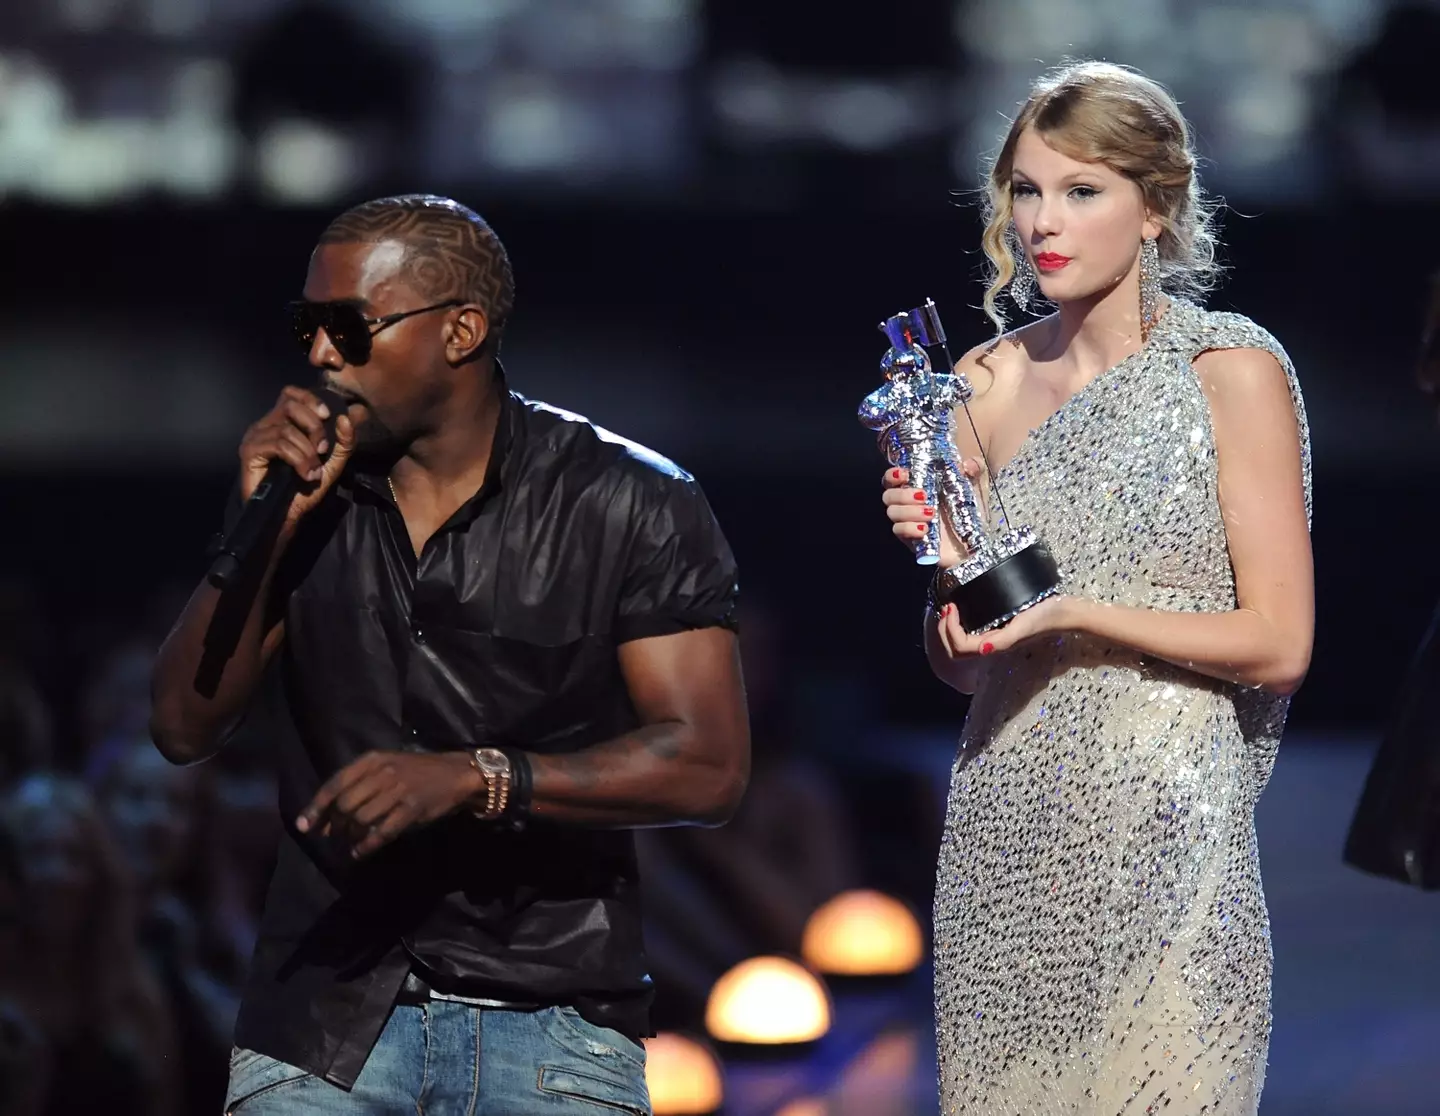 Kanye West and Taylor Swift's fallout dates back to 2009.